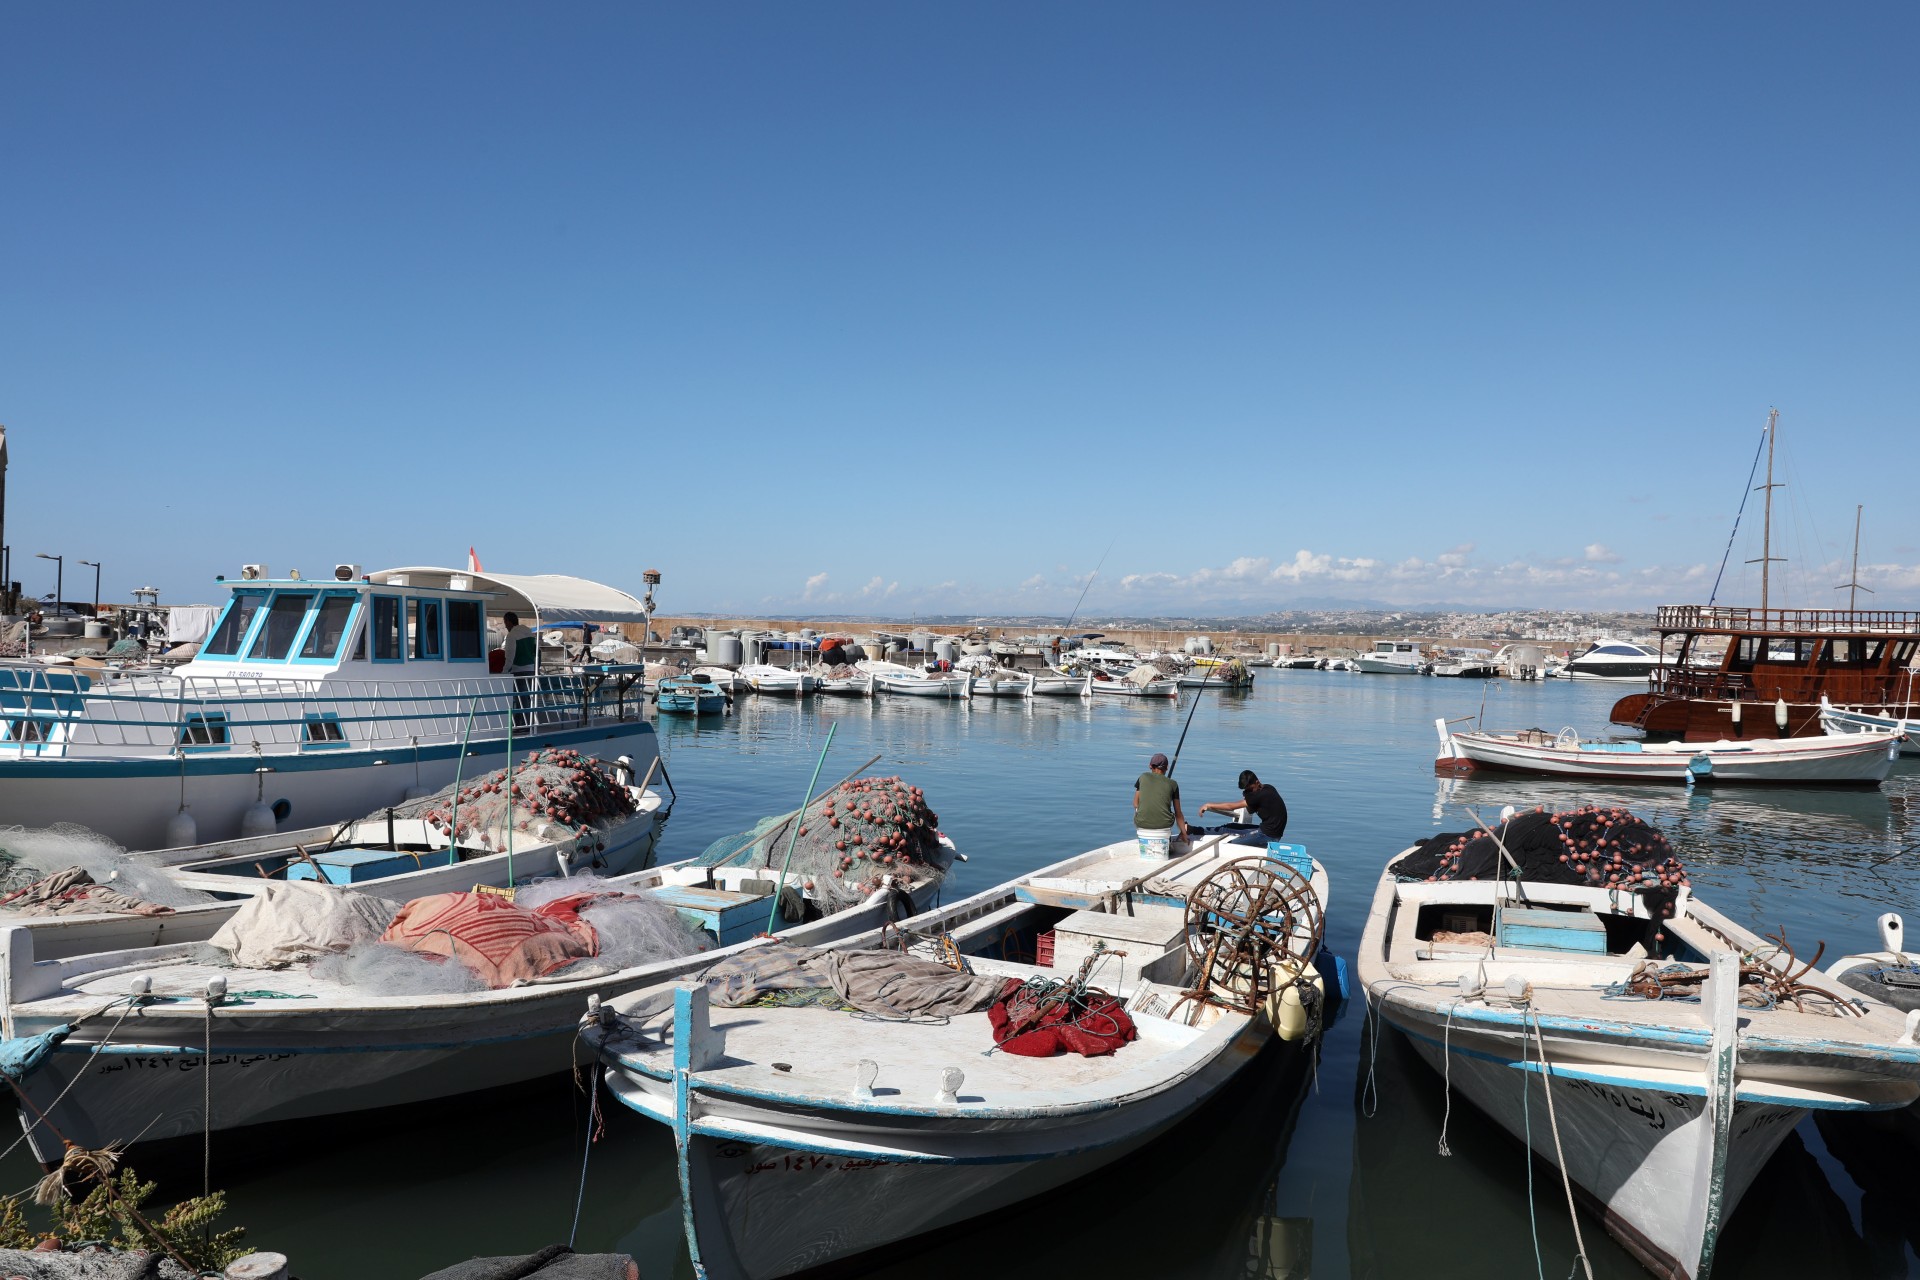 The fishermen's port in Sour, south Lebanon (MEE/Hassan Shaaban)